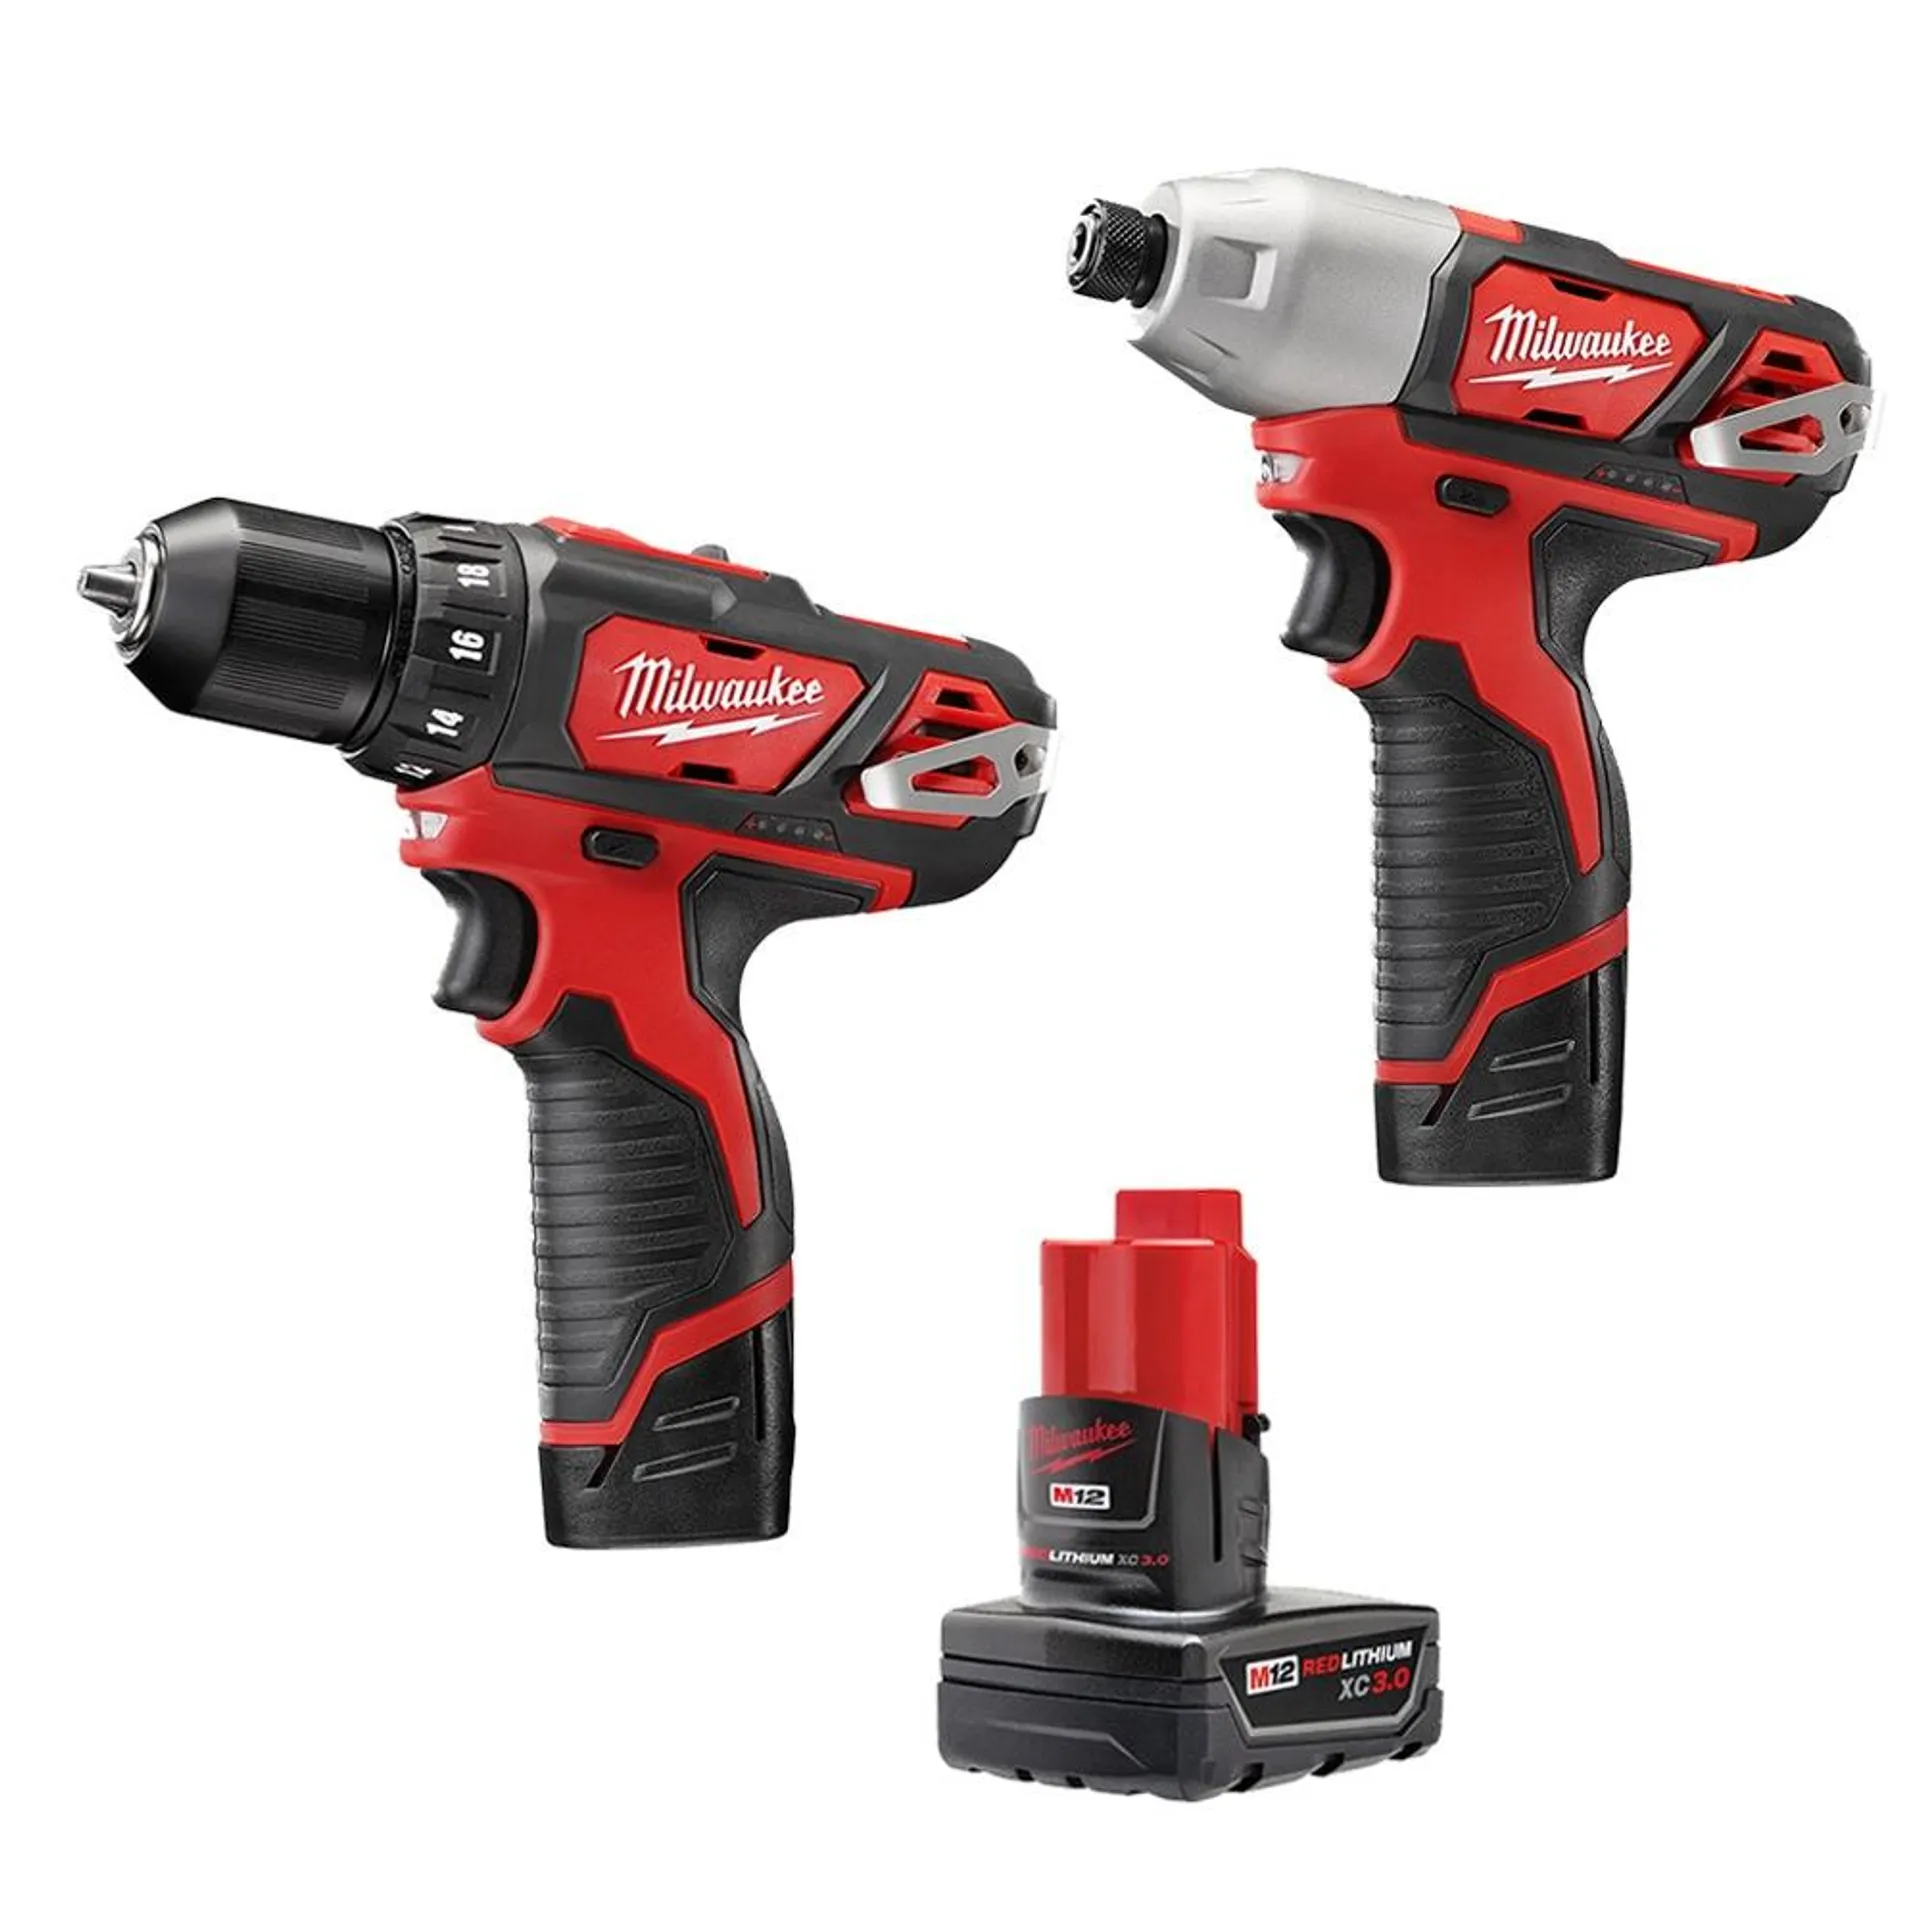 M12 12-Volt Lithium-Ion Cordless Drill Driver/Impact Driver Combo Kit (2-Tool) w/ (3) Batteries